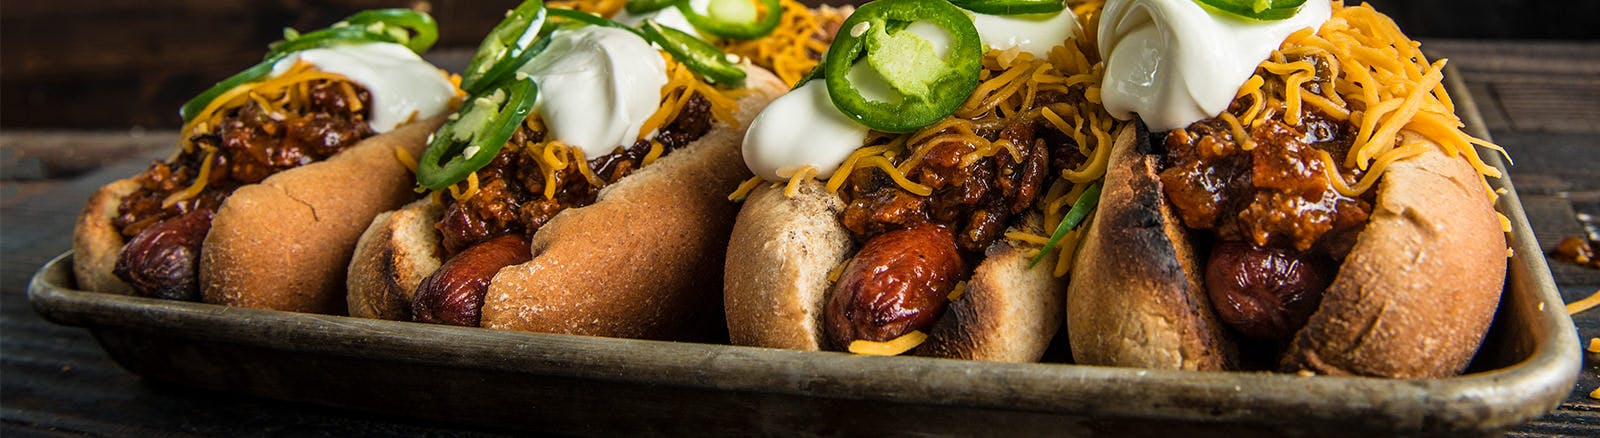 Bacon Chili Cheese Dogs